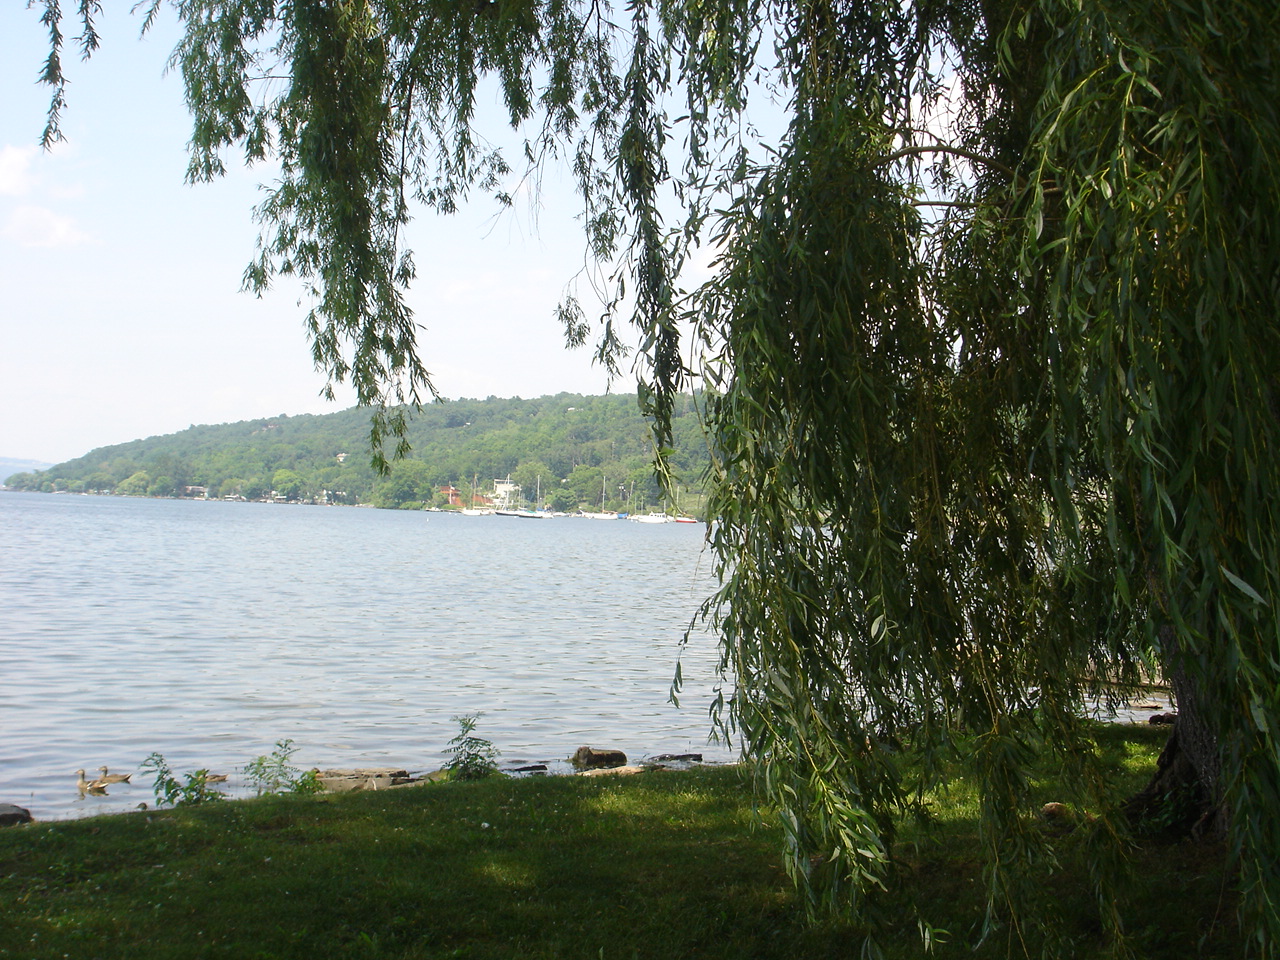 From a Stewart Park bench looking out on Cayuga Lake